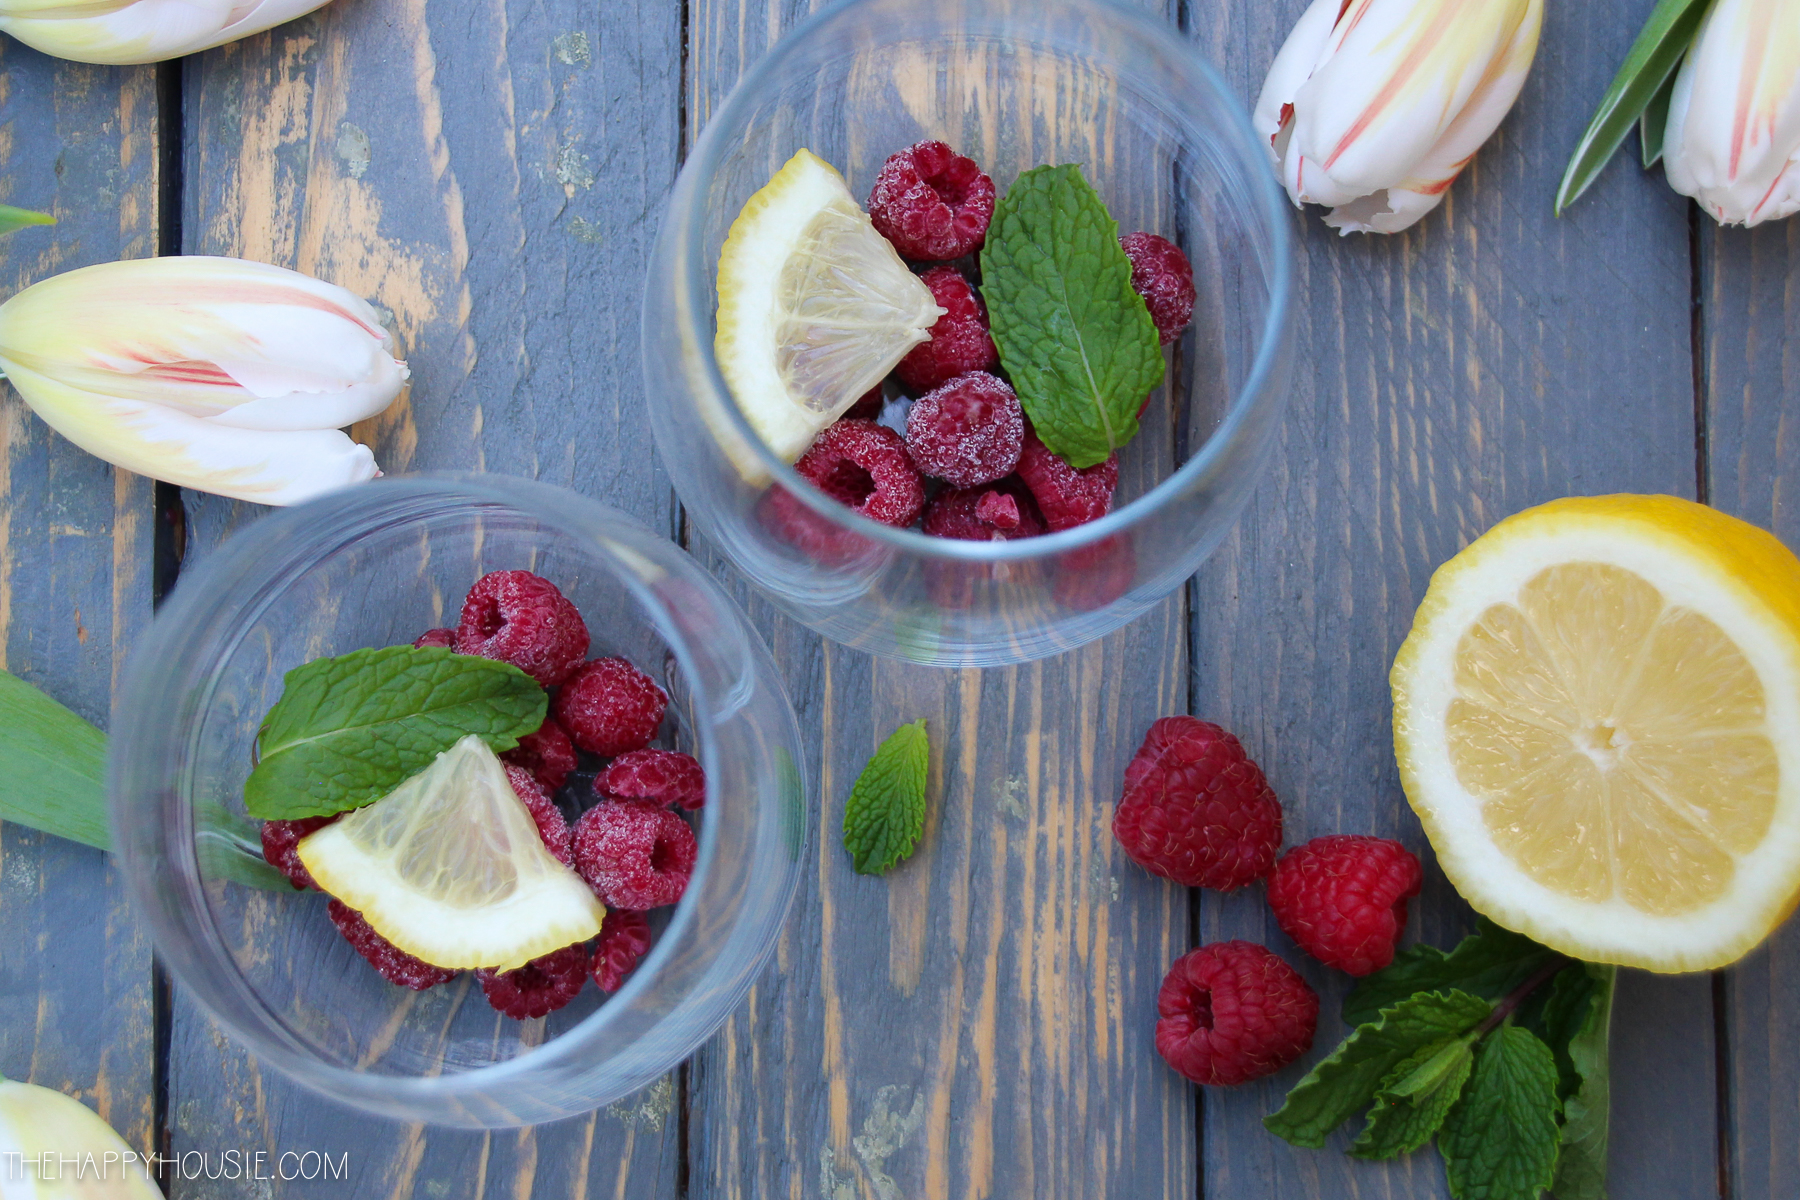 Raspberries, a cut lemon, and mint in the bottom of a glass.